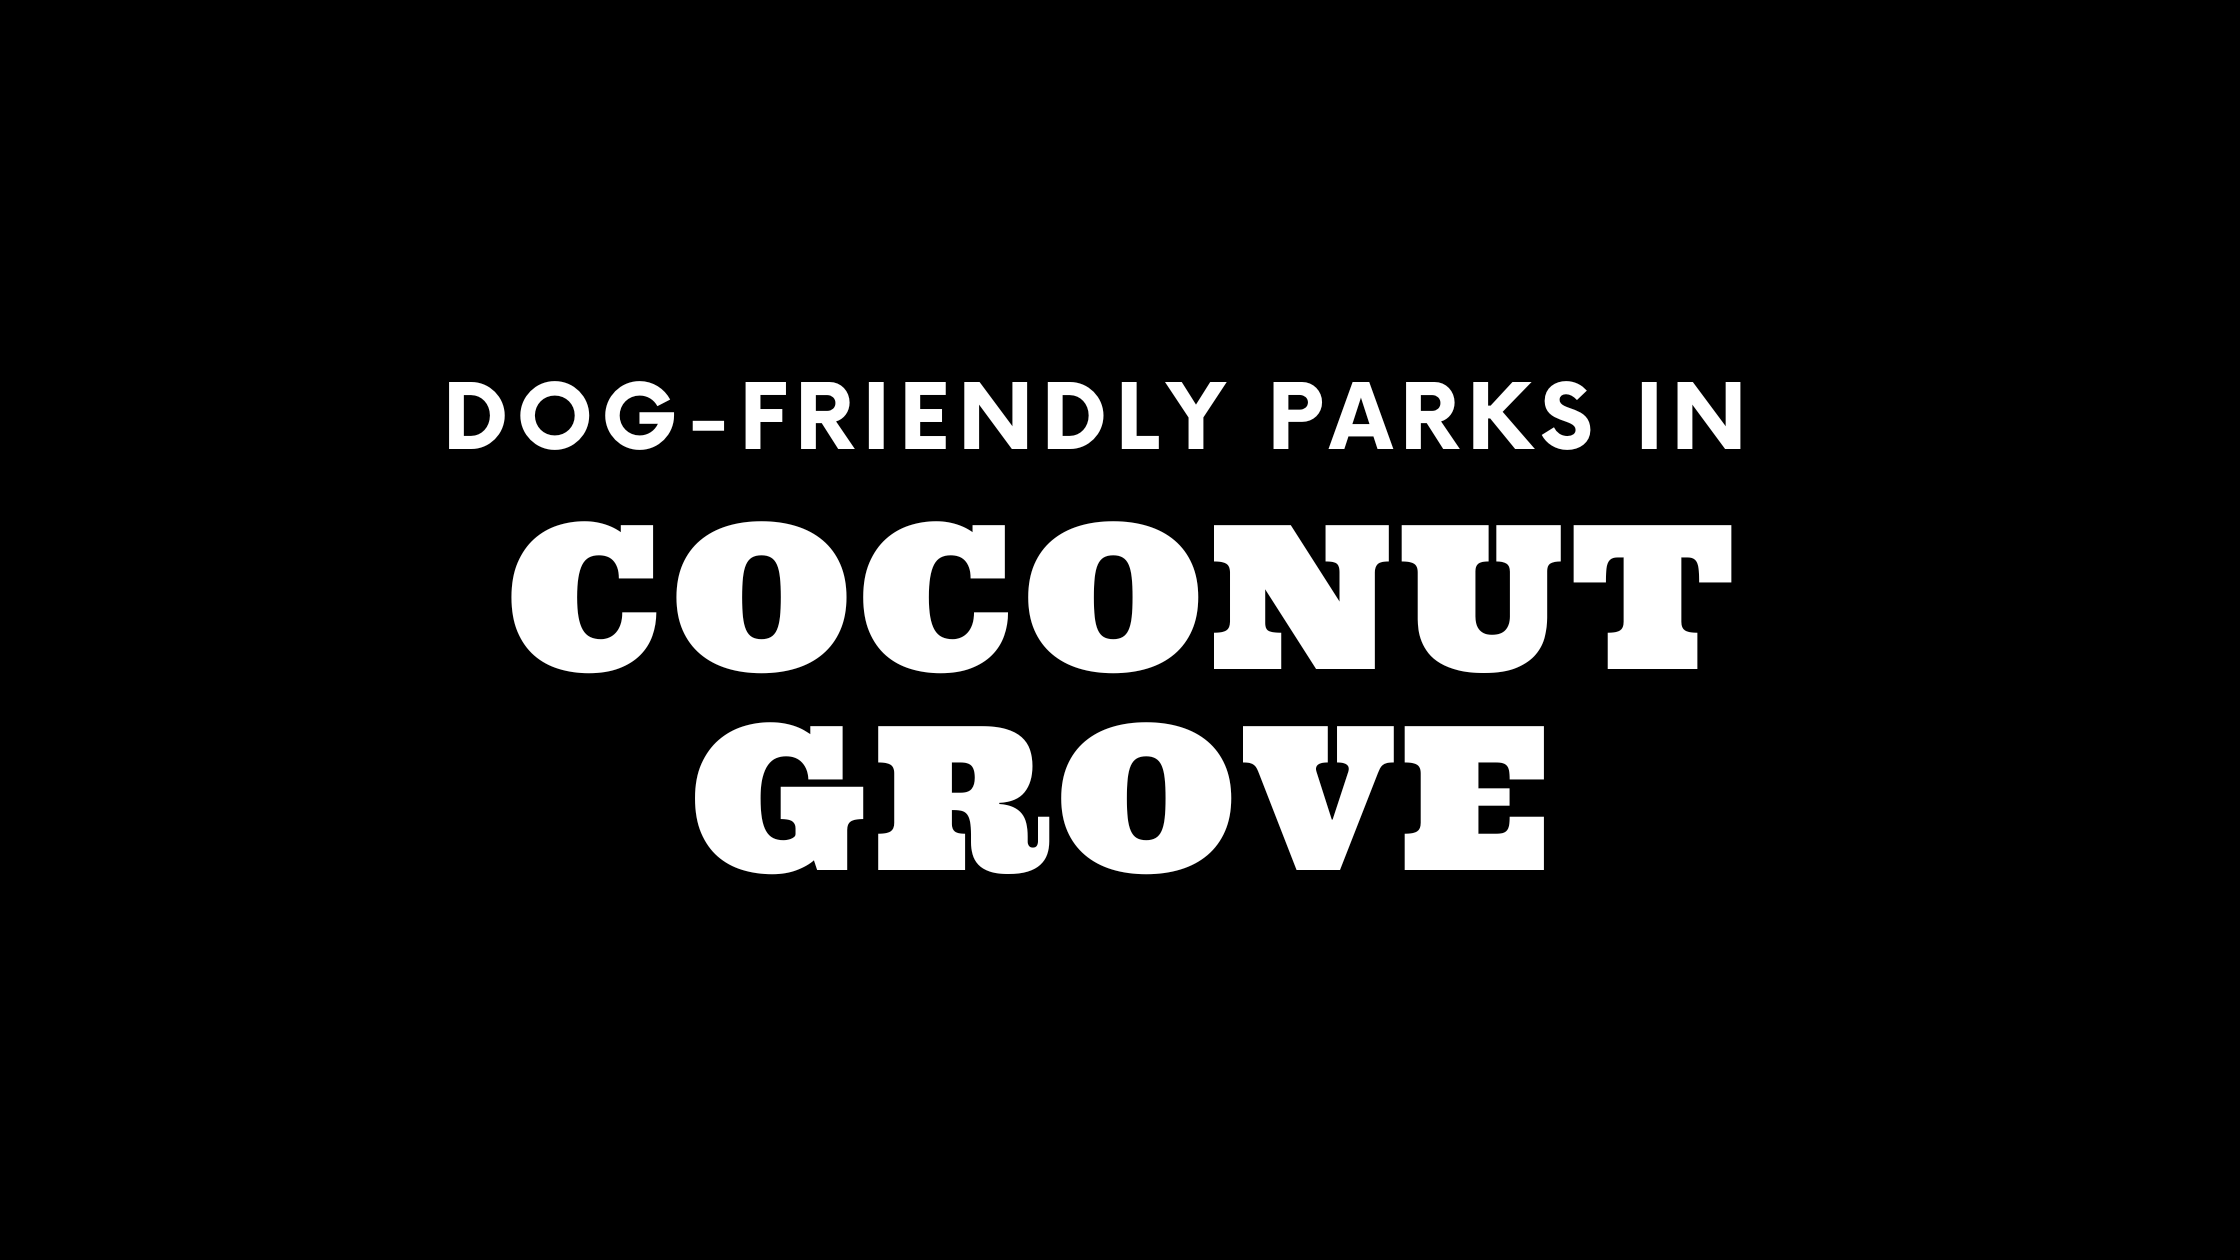 Dog-Friendly Parks in Coconut Grove